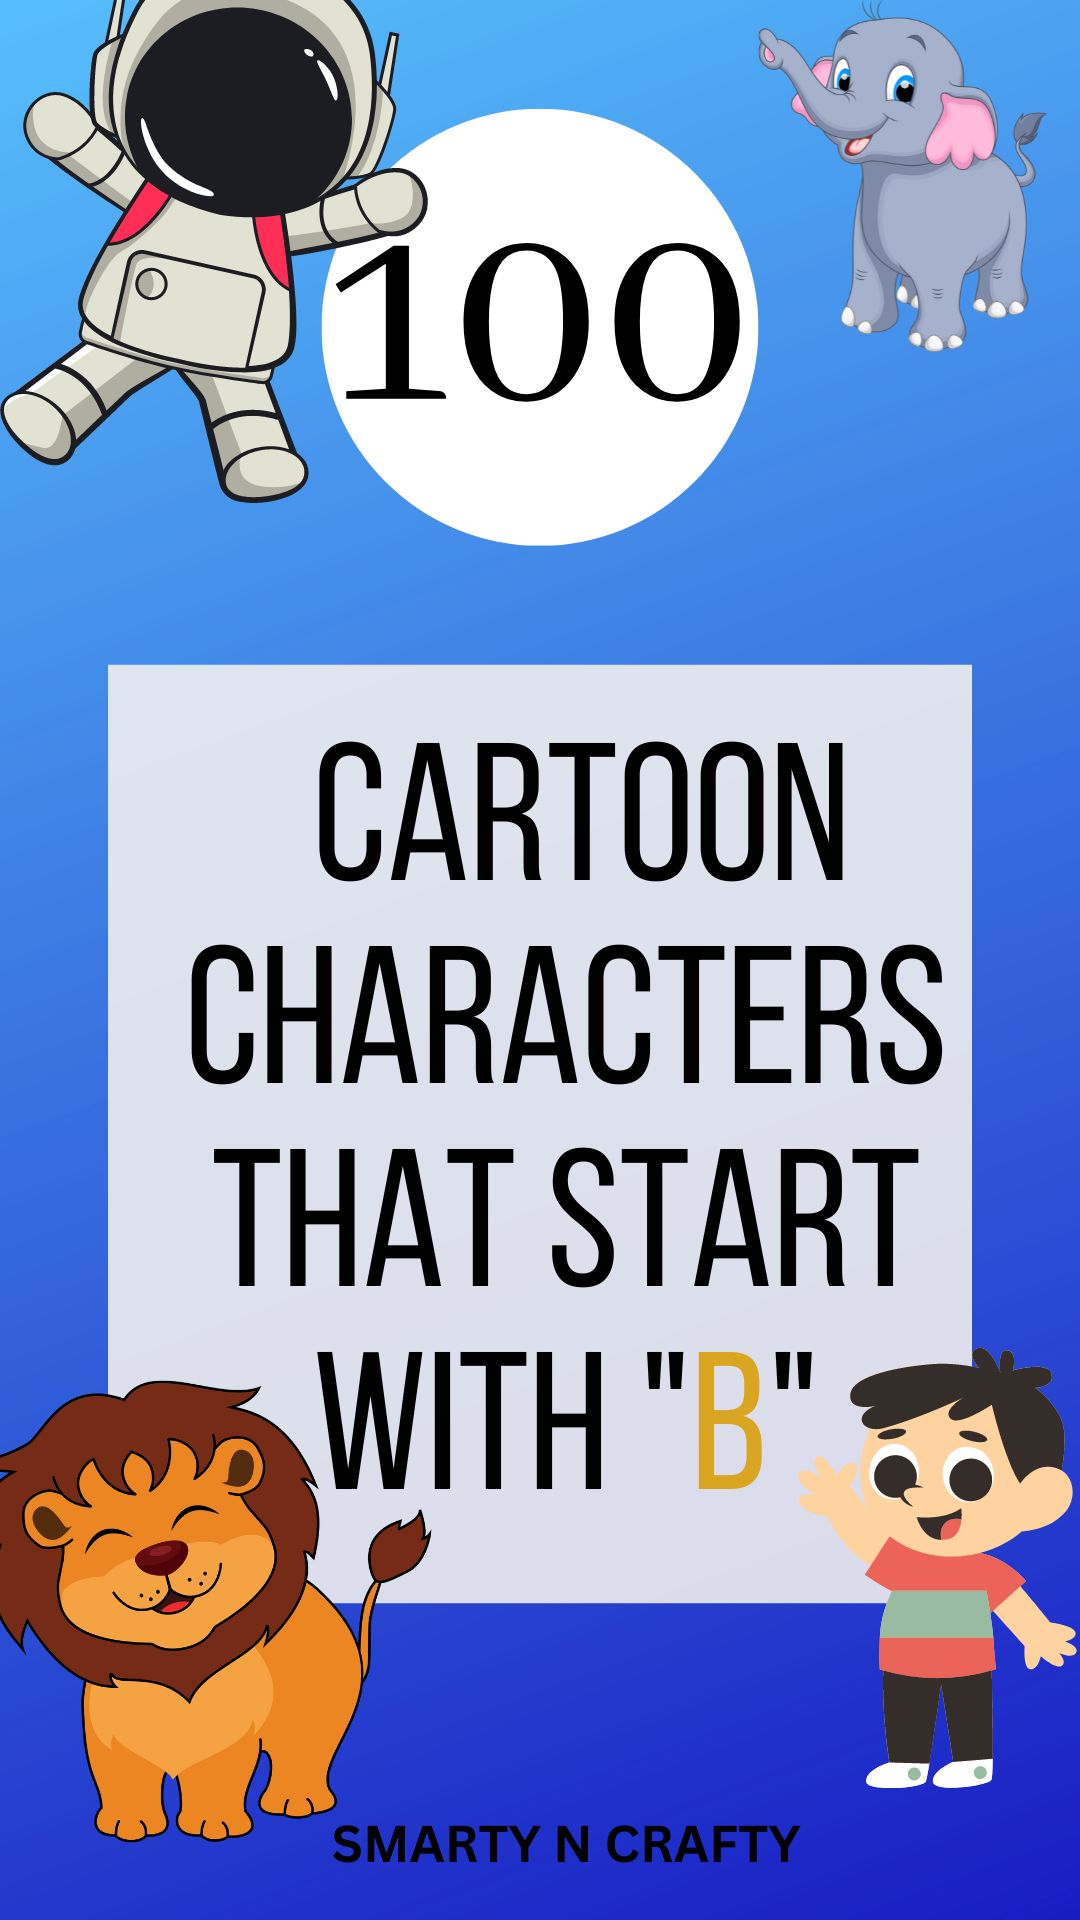 cartoon characters that start with B